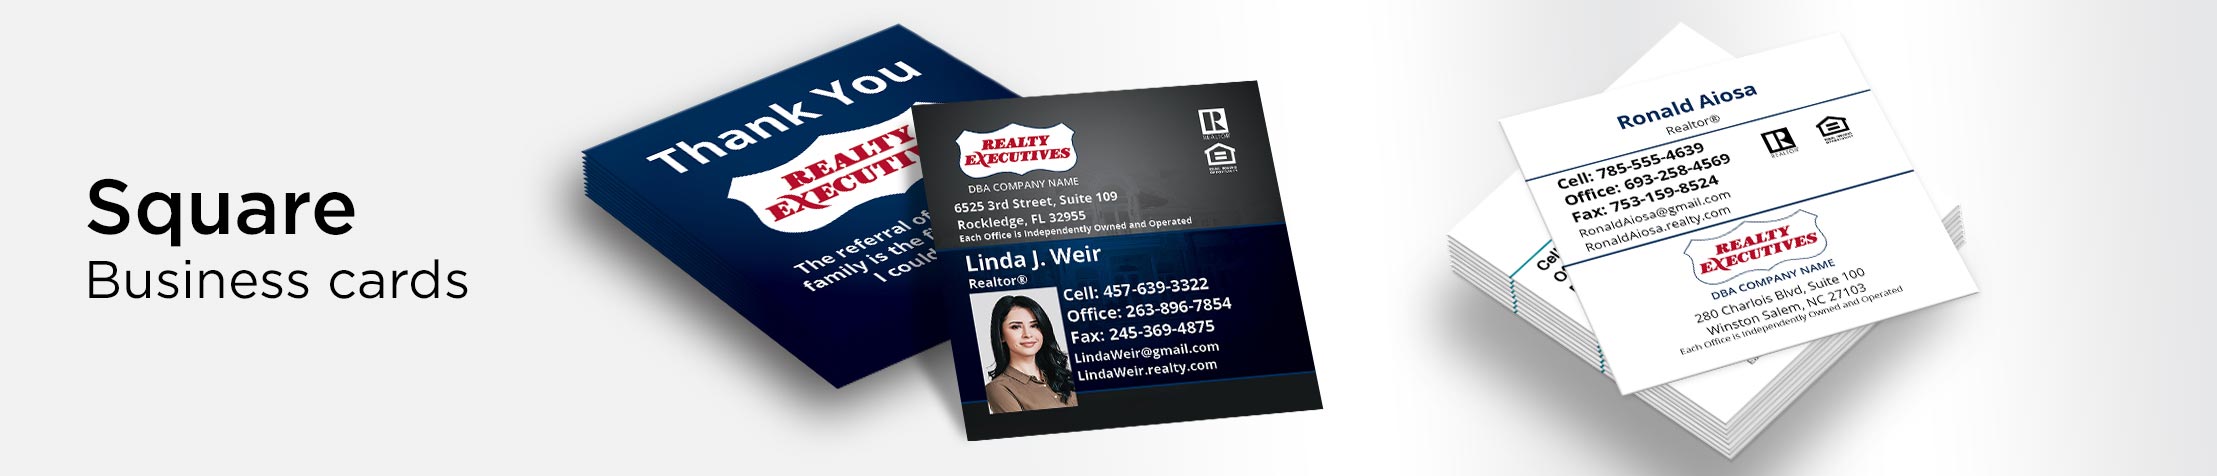 realty executives business cards 2